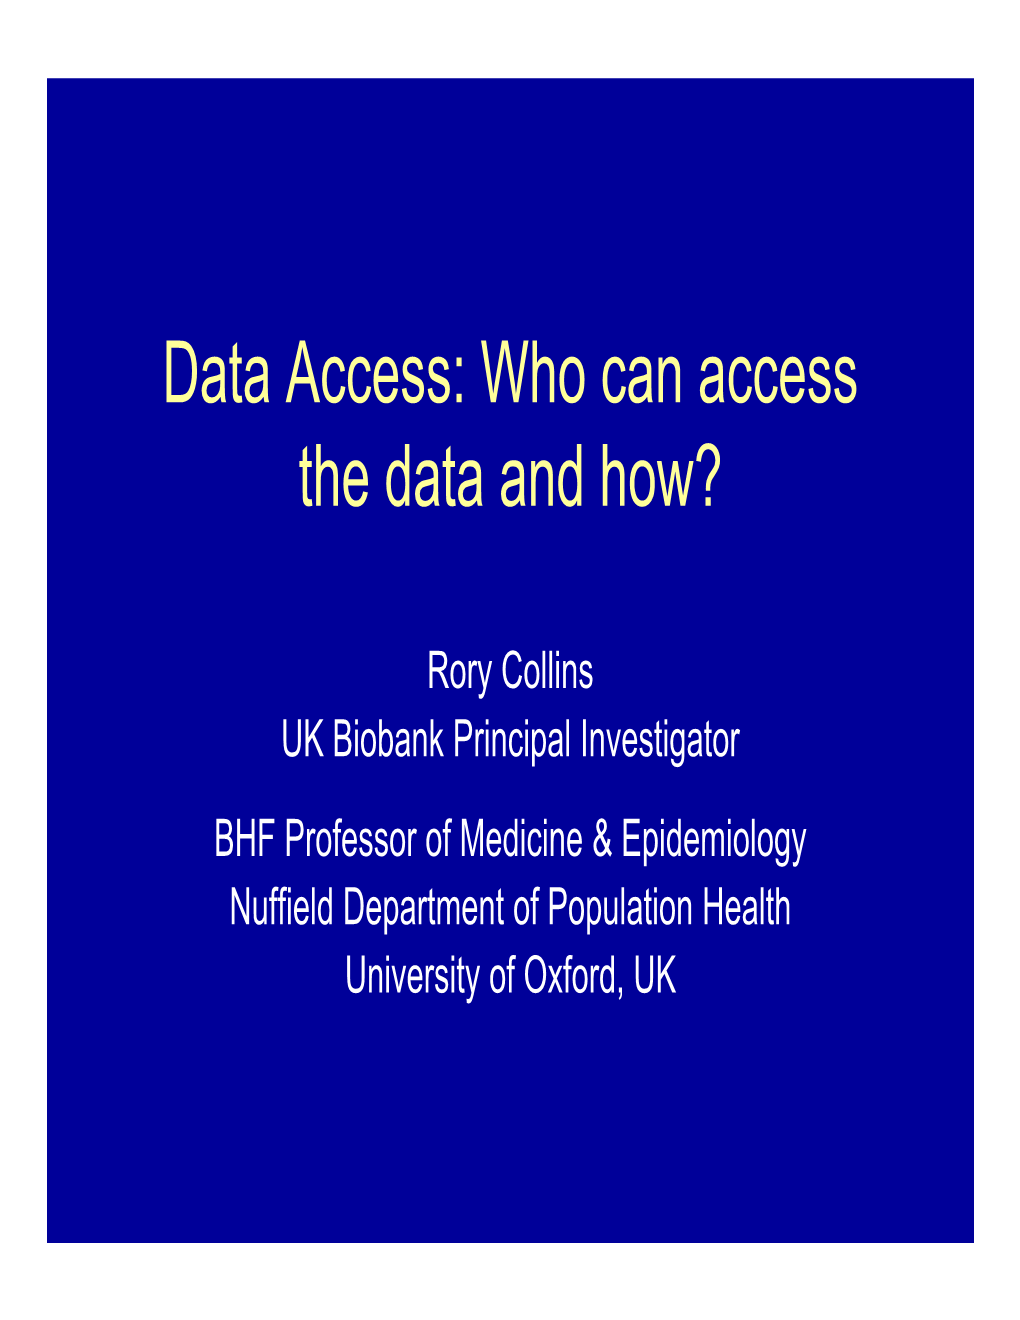 Who Can Access the Data and How?